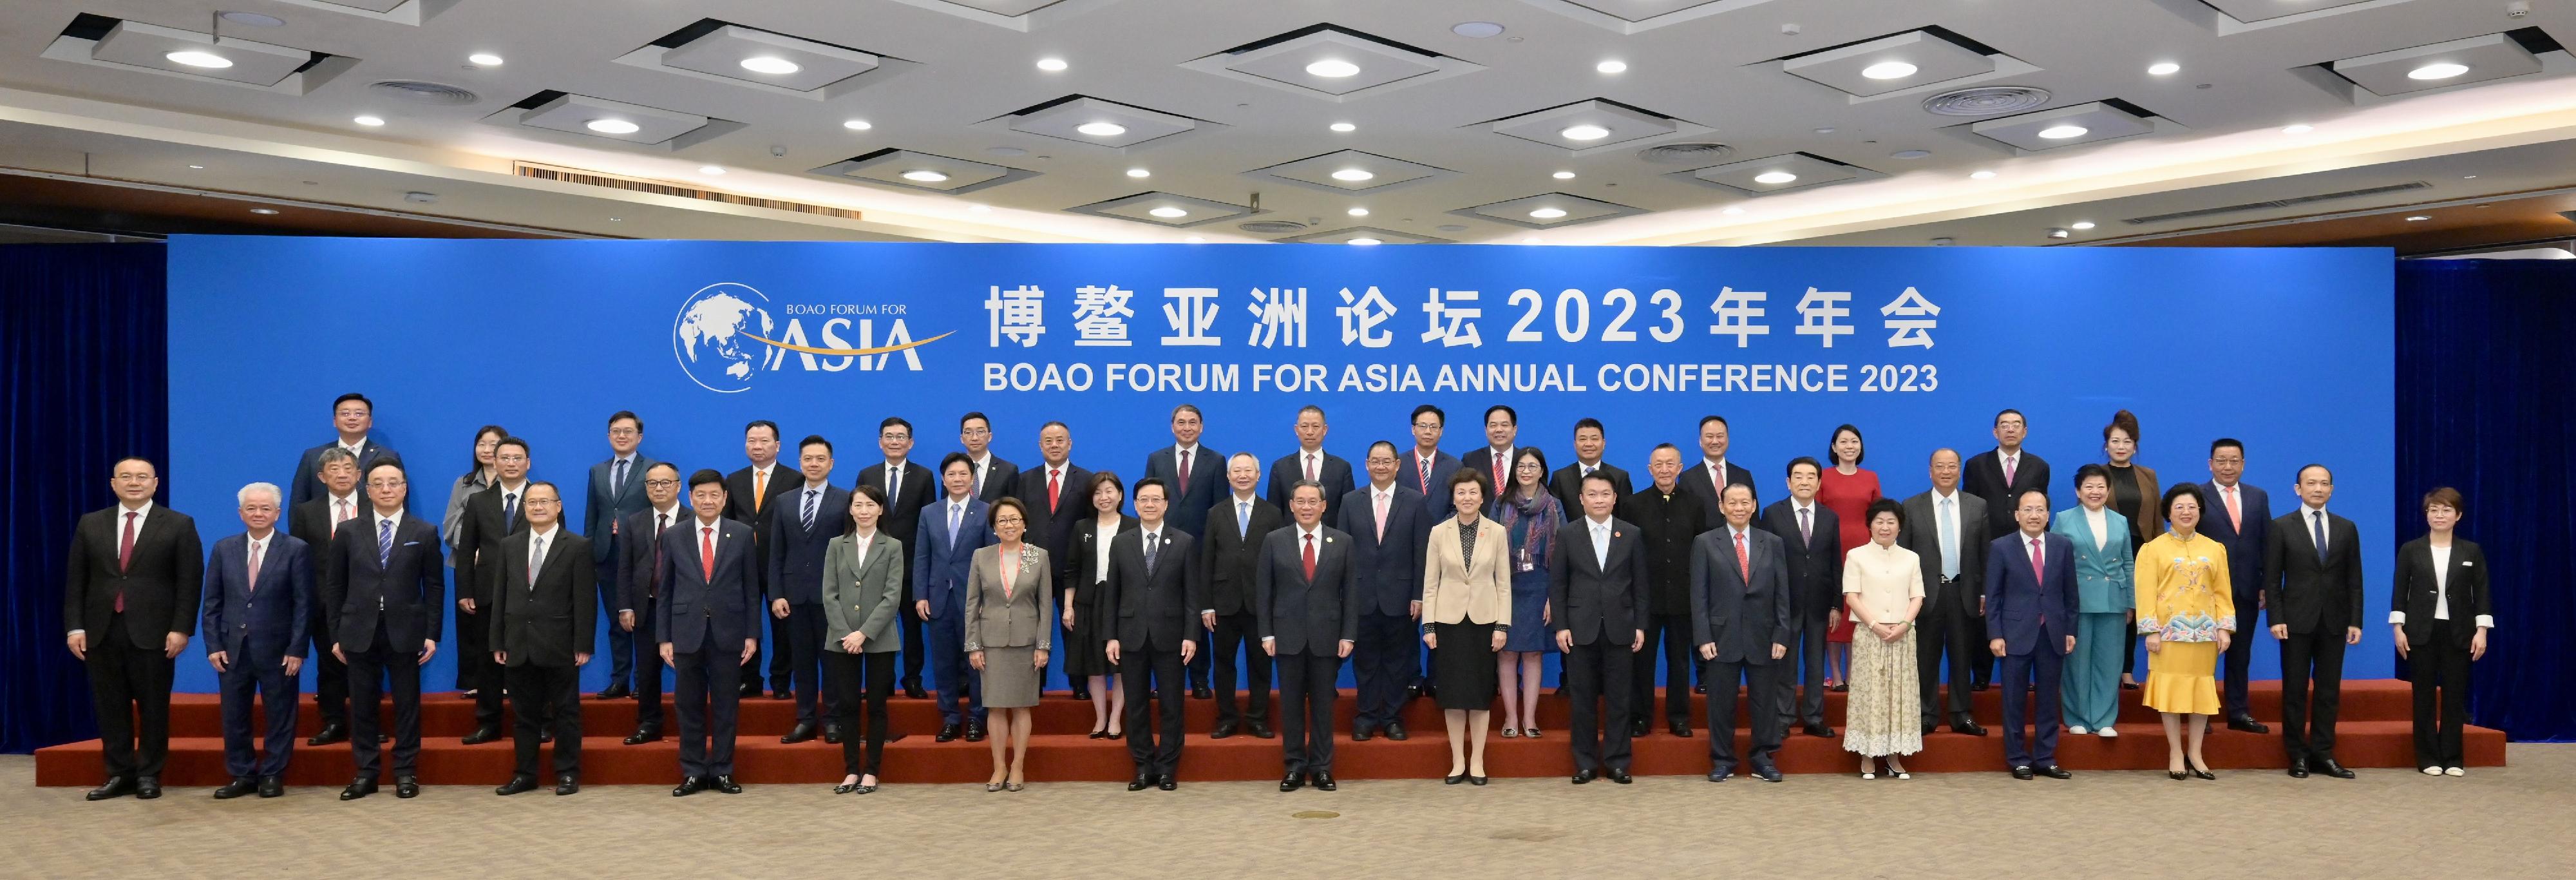 Premier Li Qiang (front row, centre) is pictured with the Chief Executive, Mr John Lee (front row, eighth left), and other delegates taking part in the Boao Forum for Asia Annual Conference 2023 in Hainan today (March 30). The Director of the Chief Executive's Office, Ms Carol Yip (front row, sixth left), also attended.